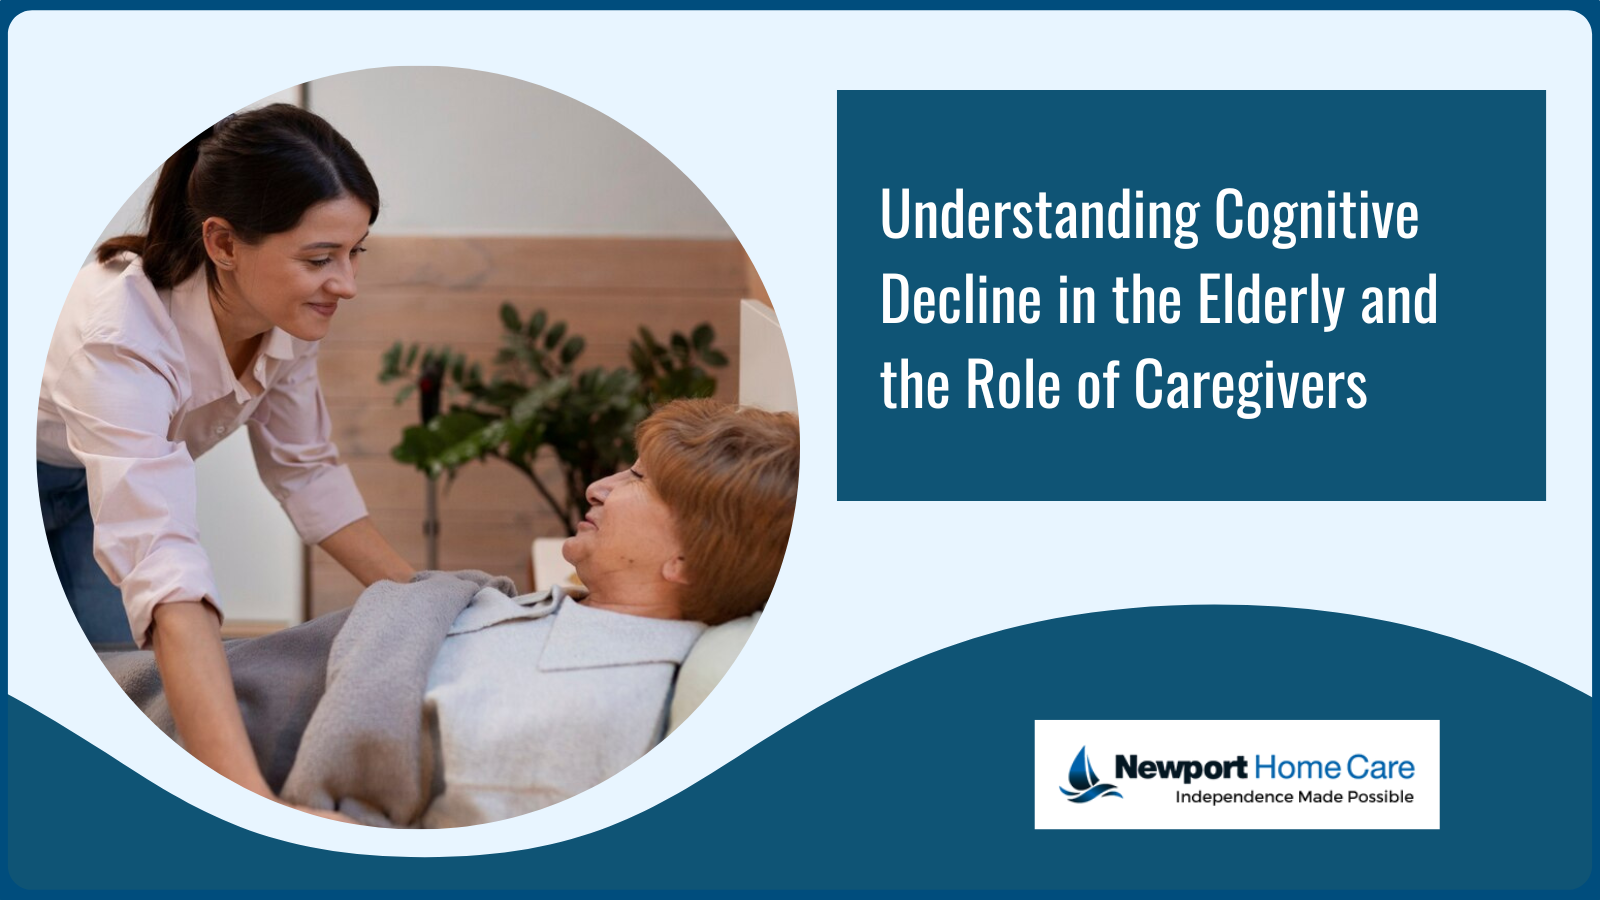 Understanding Cognitive Decline in the Elderly and the Role of Caregivers